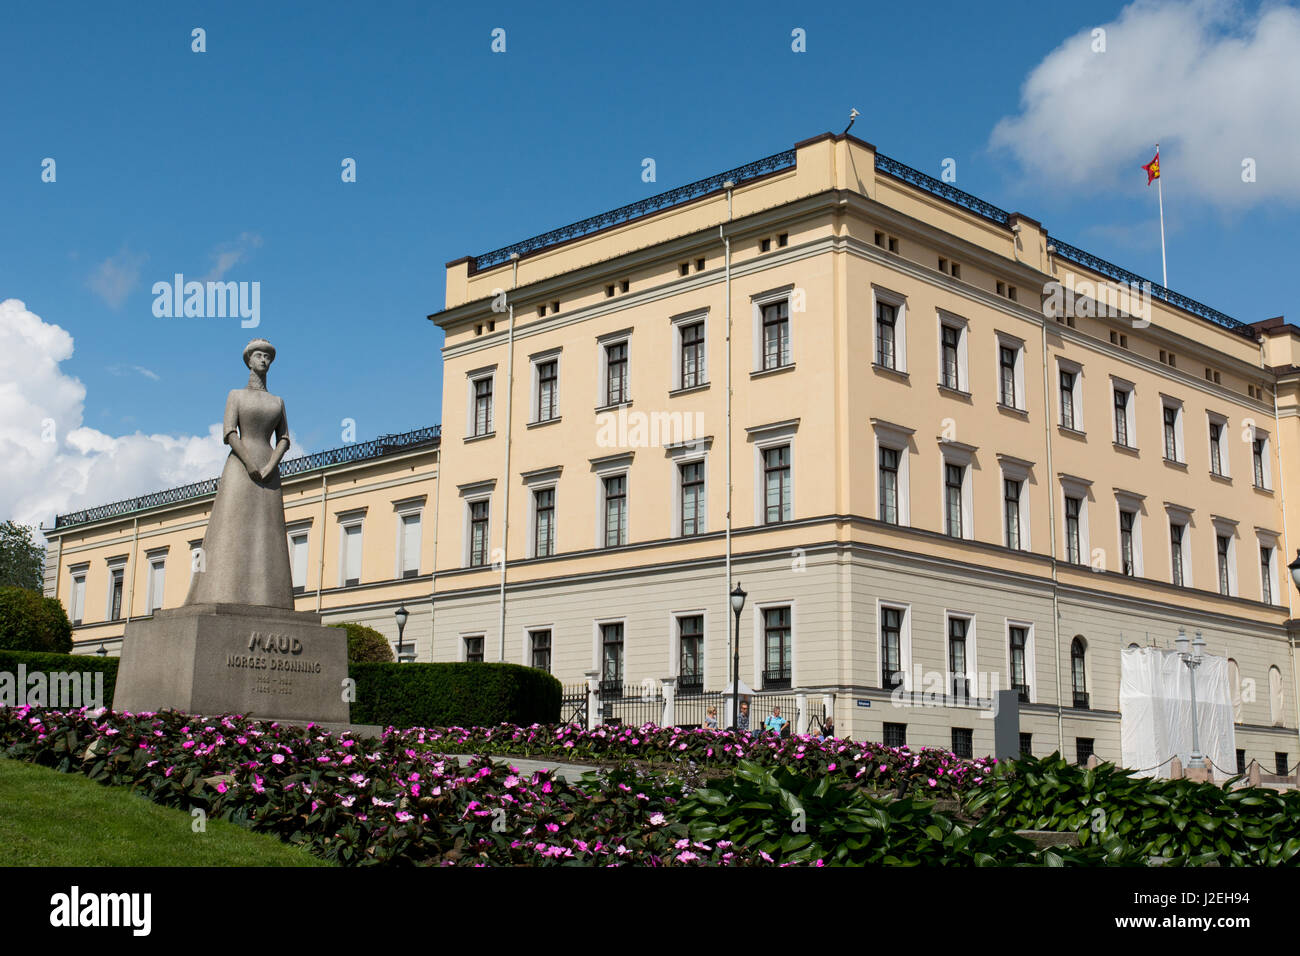 Norway, Oslo, Royal Palace (Det Kongelige Slott). 173 room Royal residence, circa 1824-1848. Statue of Maud Charlotte Mary Victoria of Wales, Queen of Norway as wife of King Haakon VII. Stock Photo